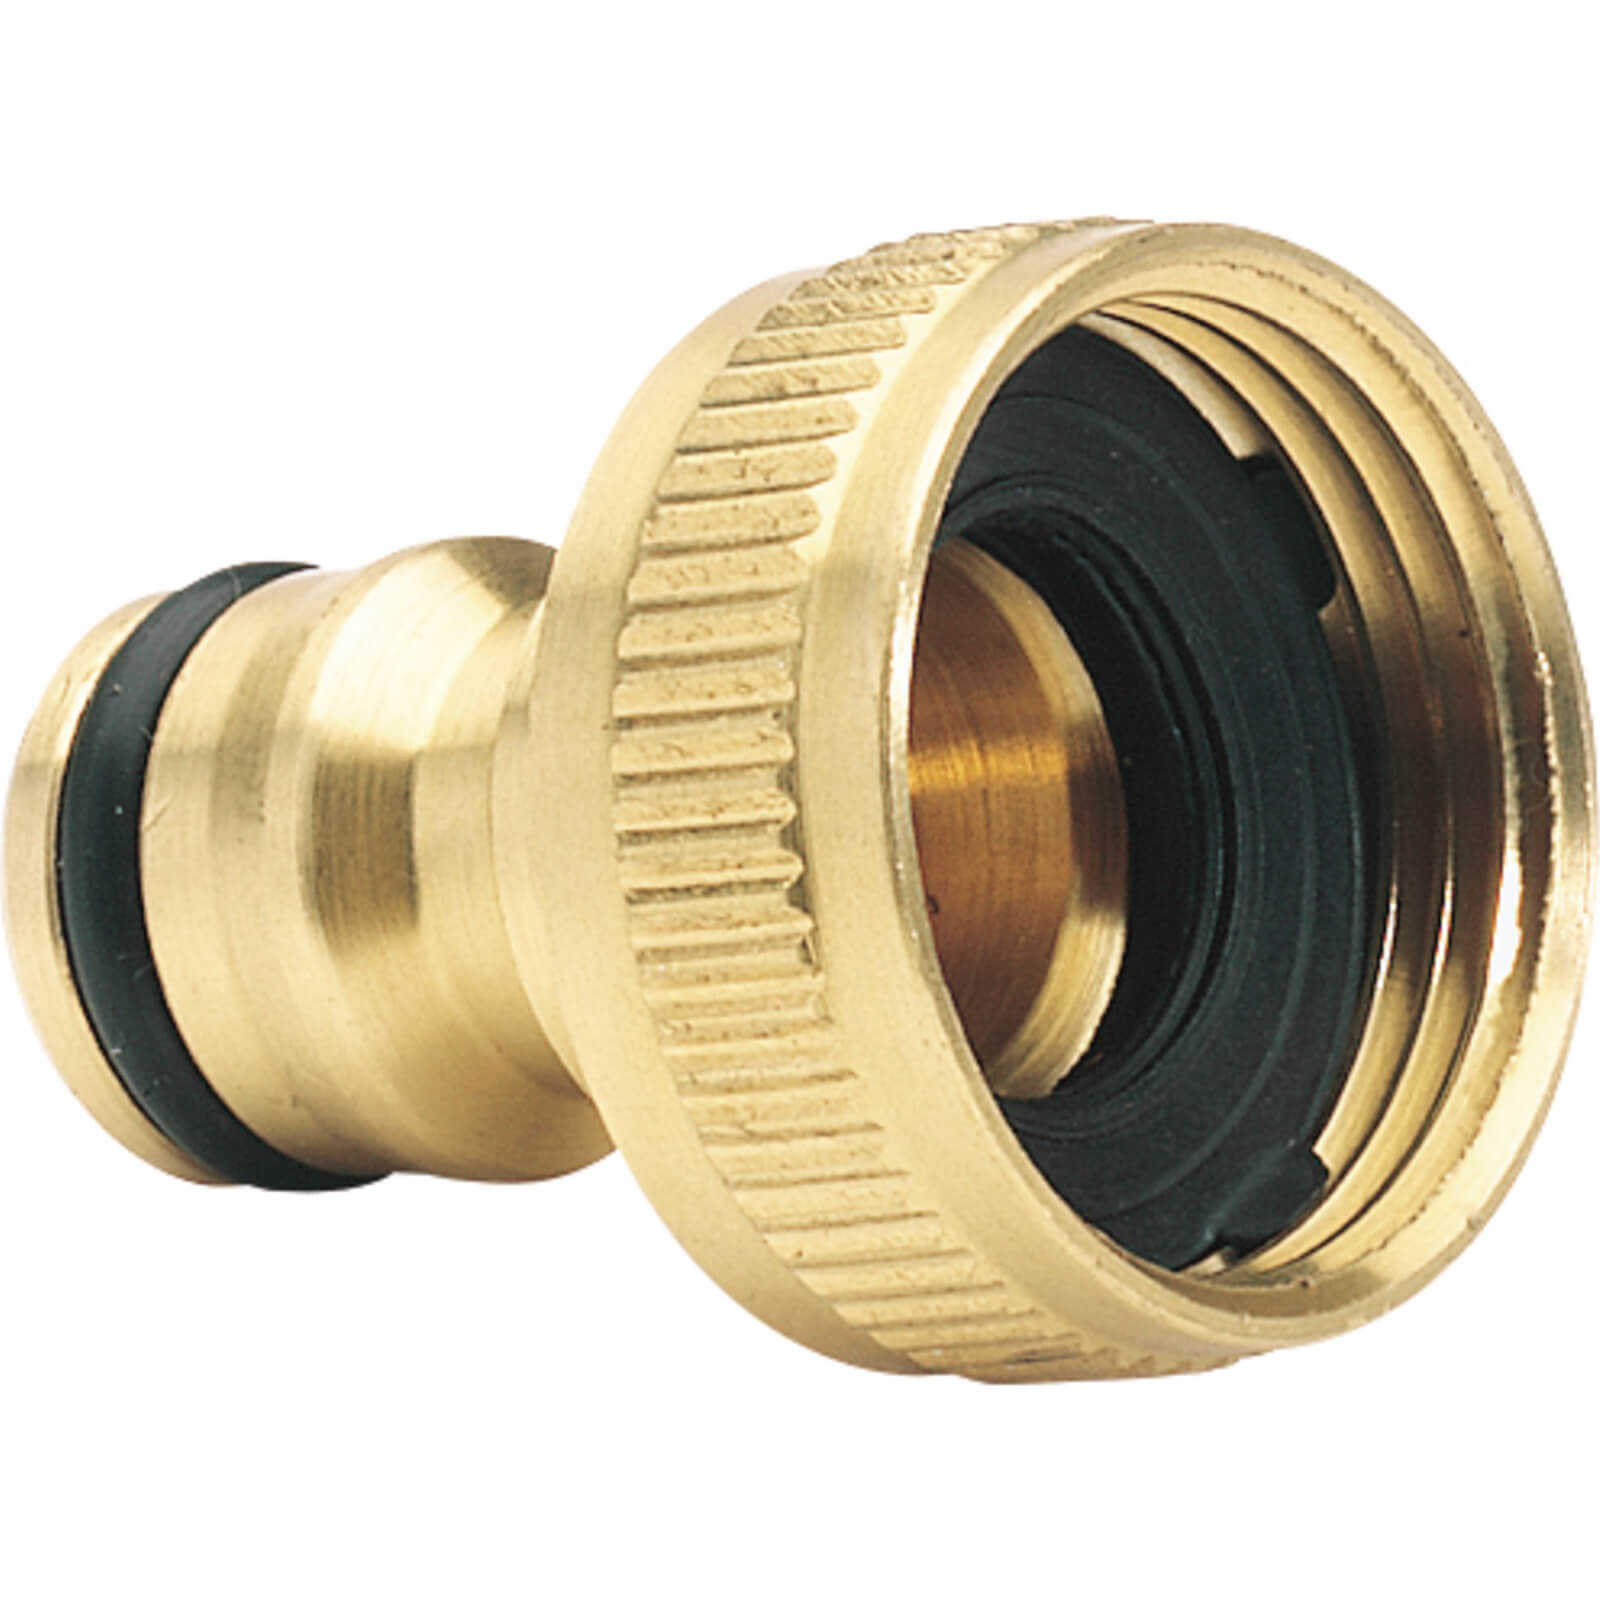 Draper Expert Brass Hose Pipe Tap Connector 3/4" / 19mm Pack of 1